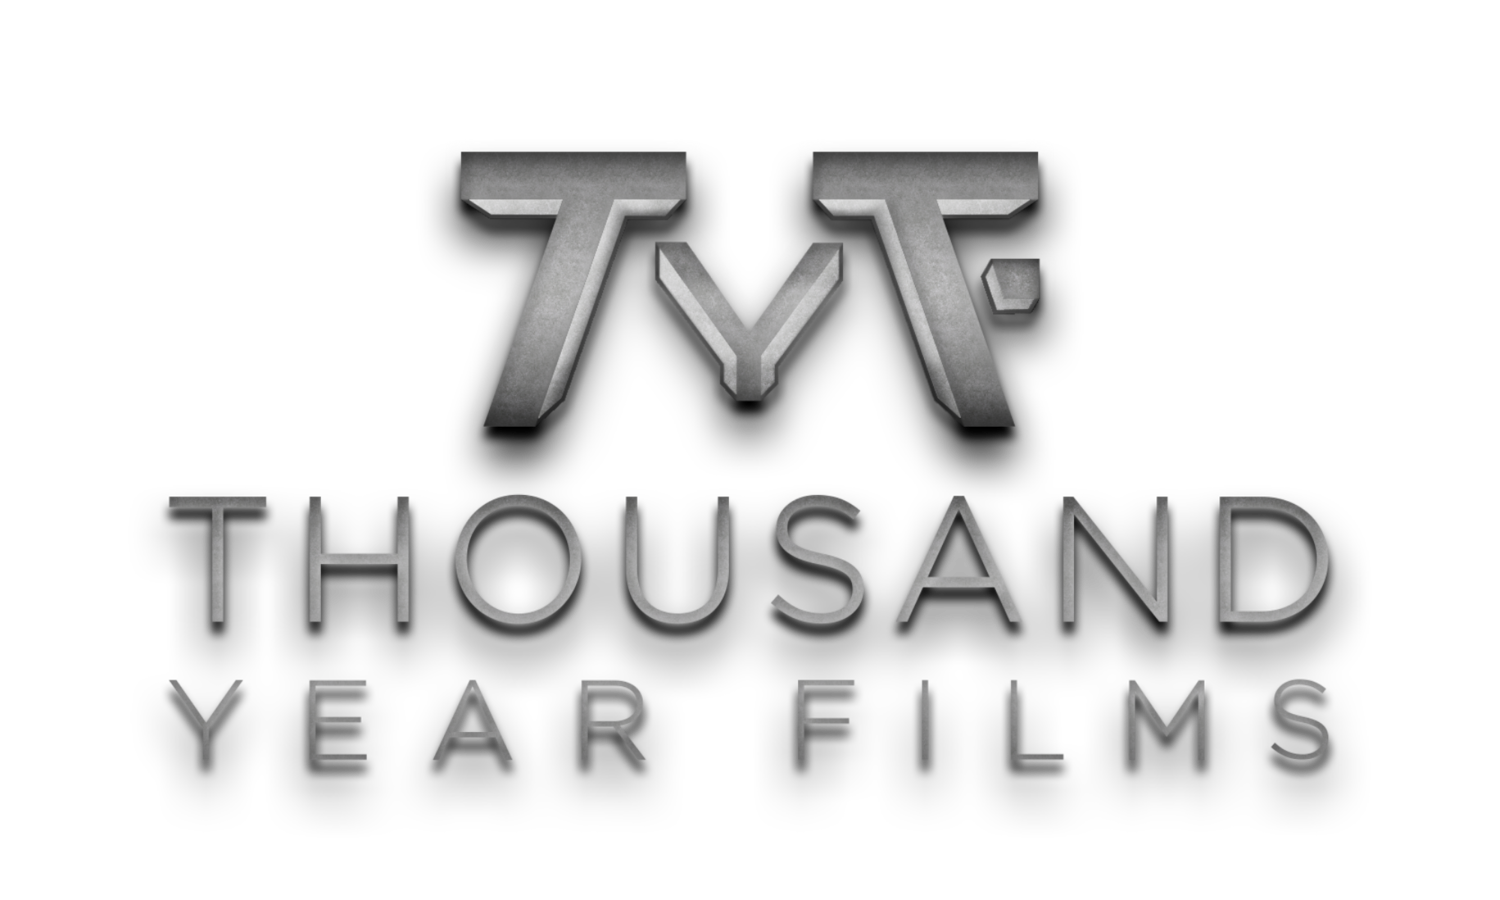 Thousand Year Films